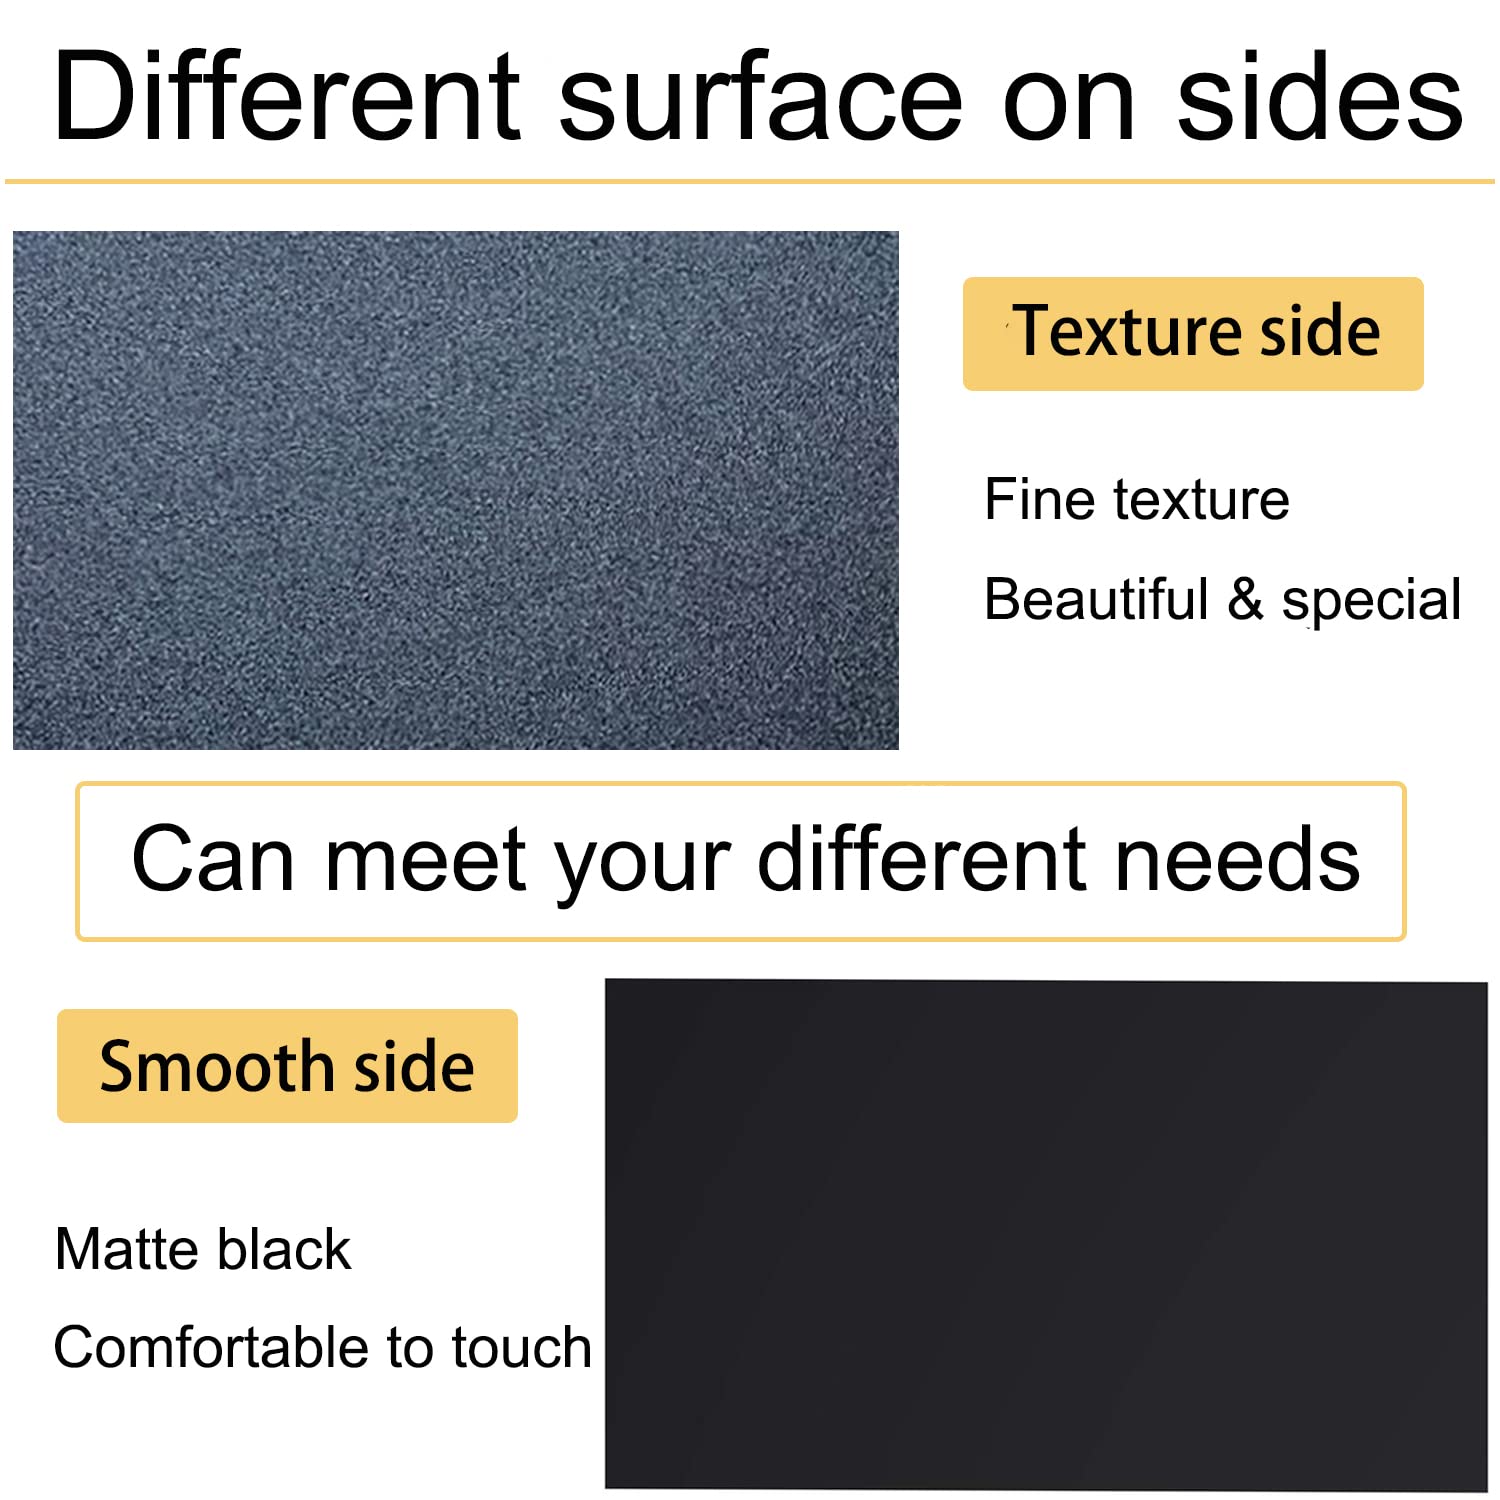 Paidu Black ABS Plastic Sheet 12" x 16" 1/8" Thick 3mm DIY Material for Home Decor Craft Projects 2 Pack Smooth & Textured Finish